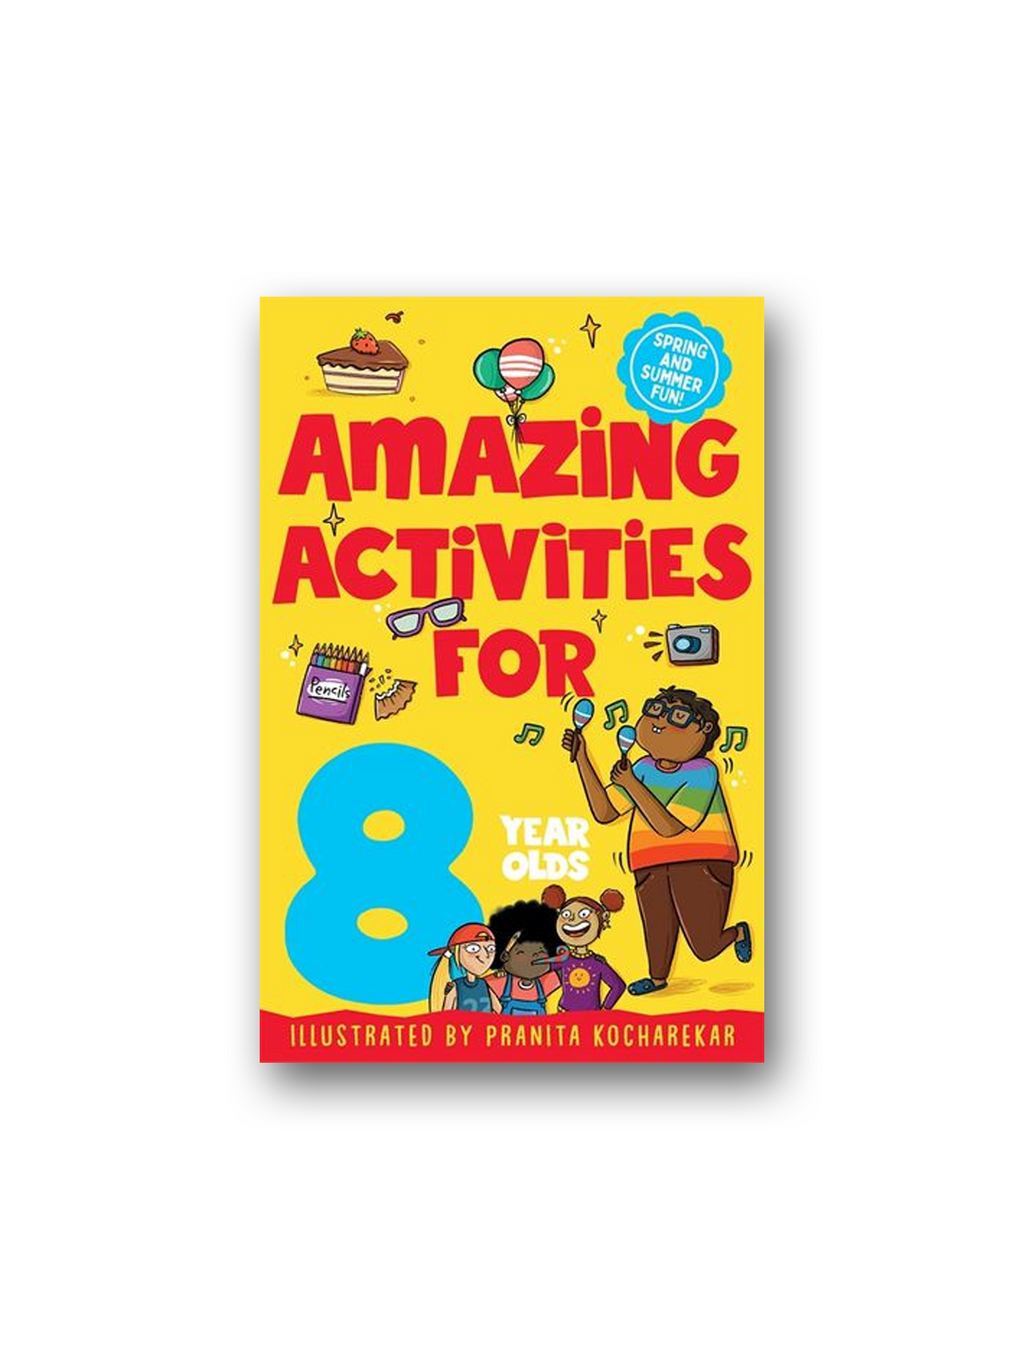 Amazing Activities for 8 year olds